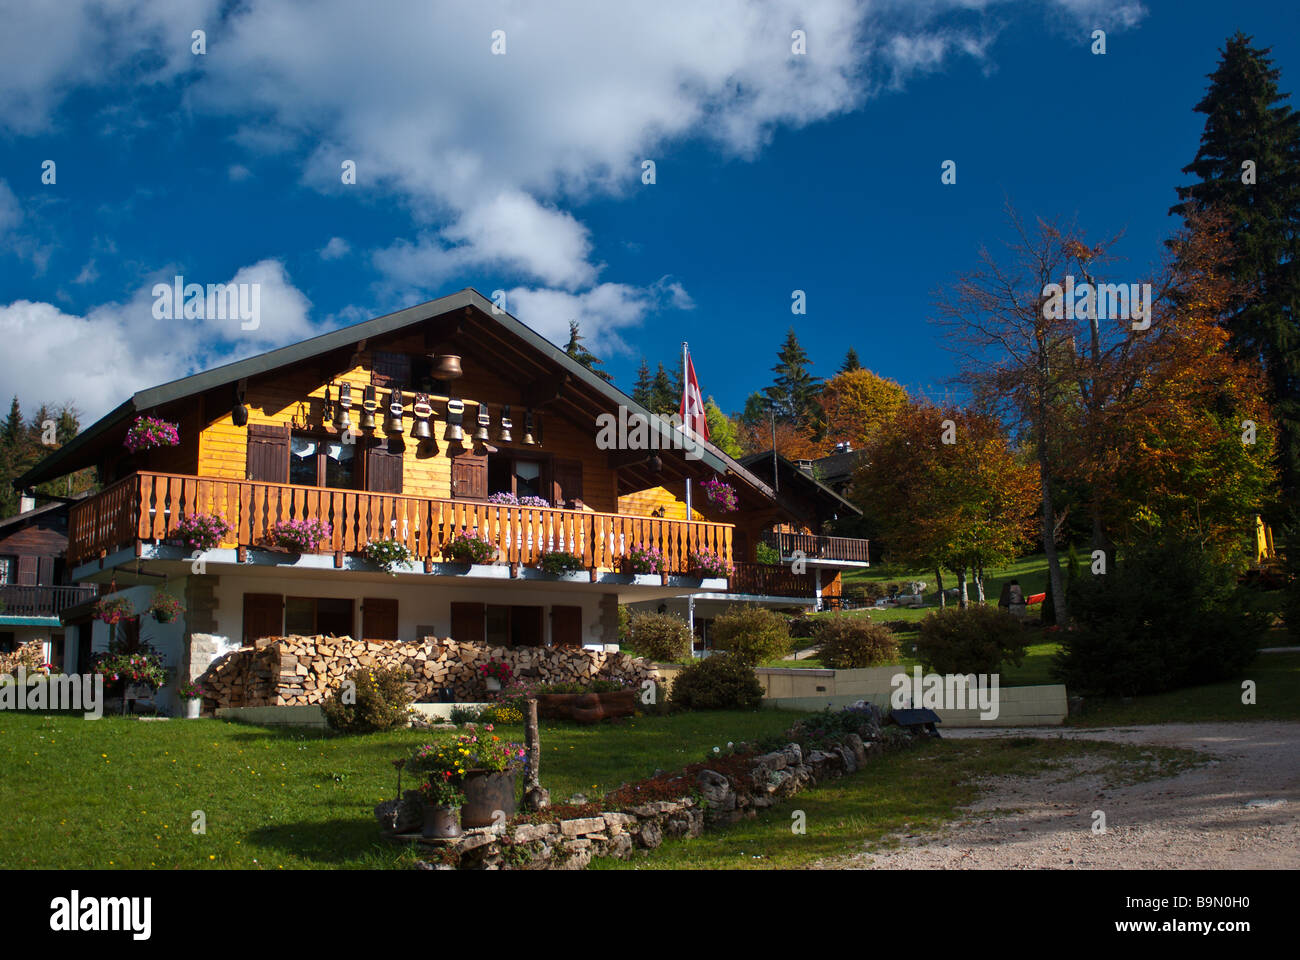 Typical Swiss Chalet on a sunny autumn afternoon, La Dôle, Switzerland Stock Photo